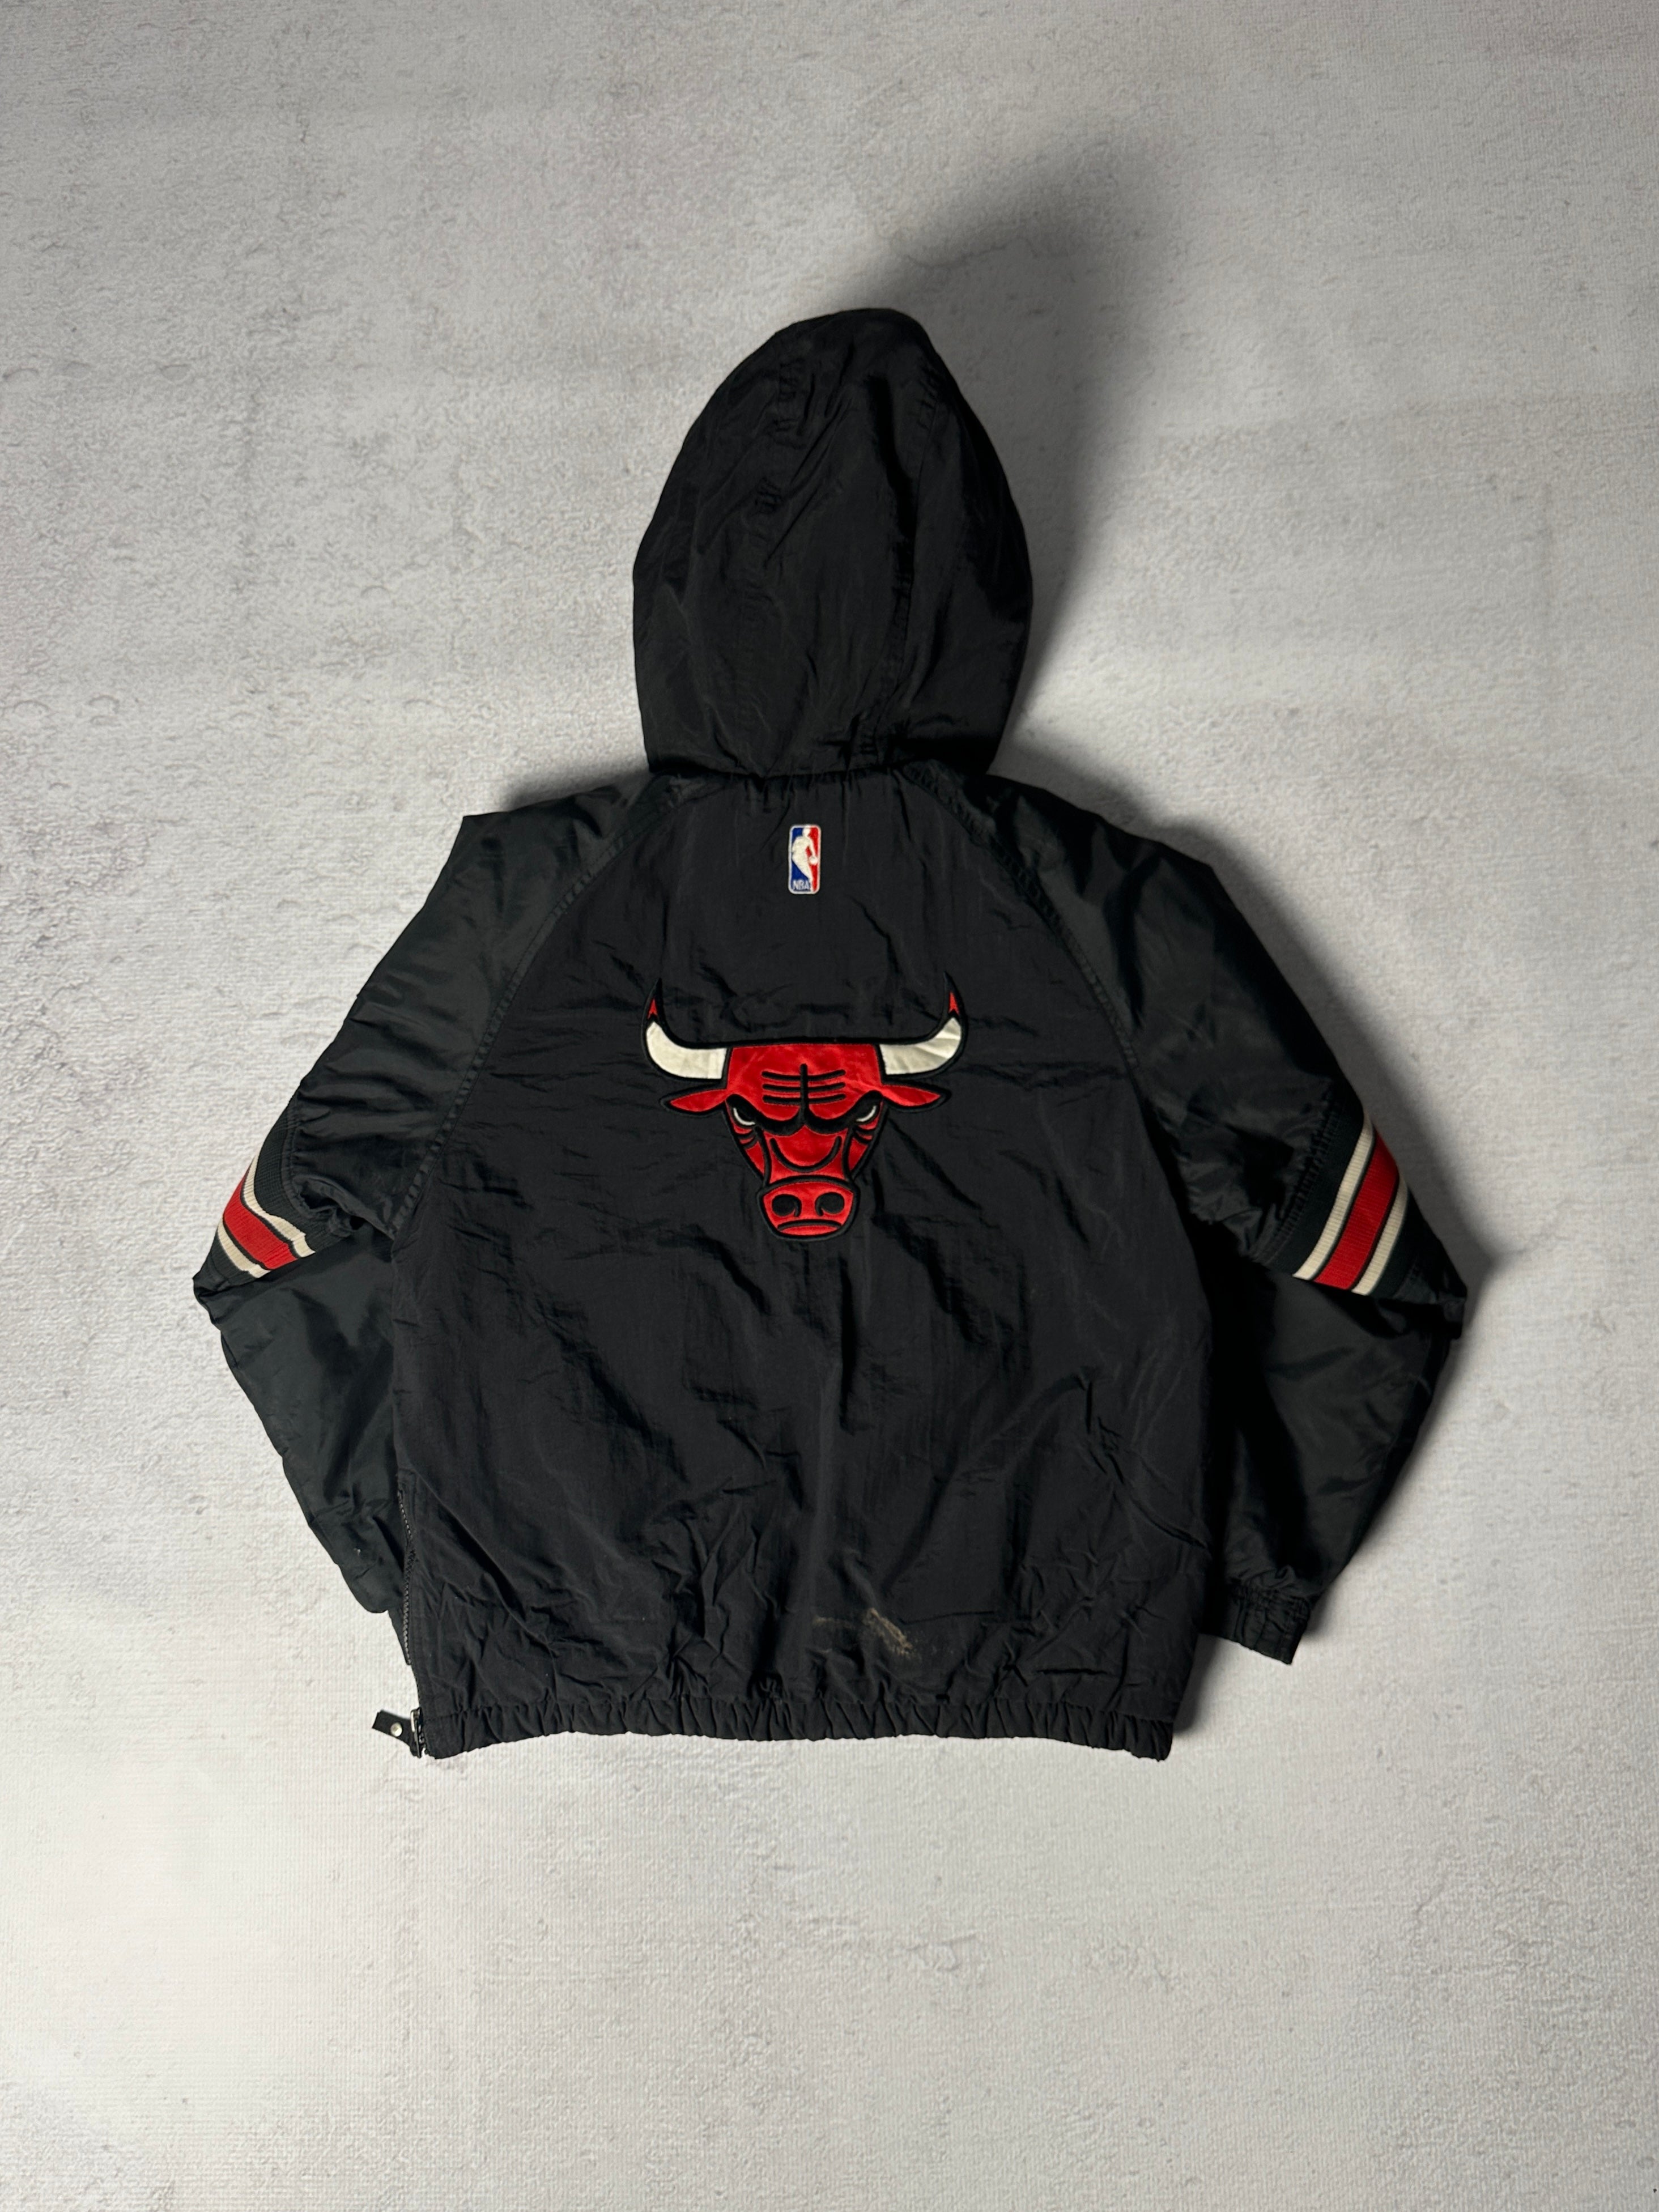 Vintage NBA Chicago Bulls Insulated Jacket - Women's Small